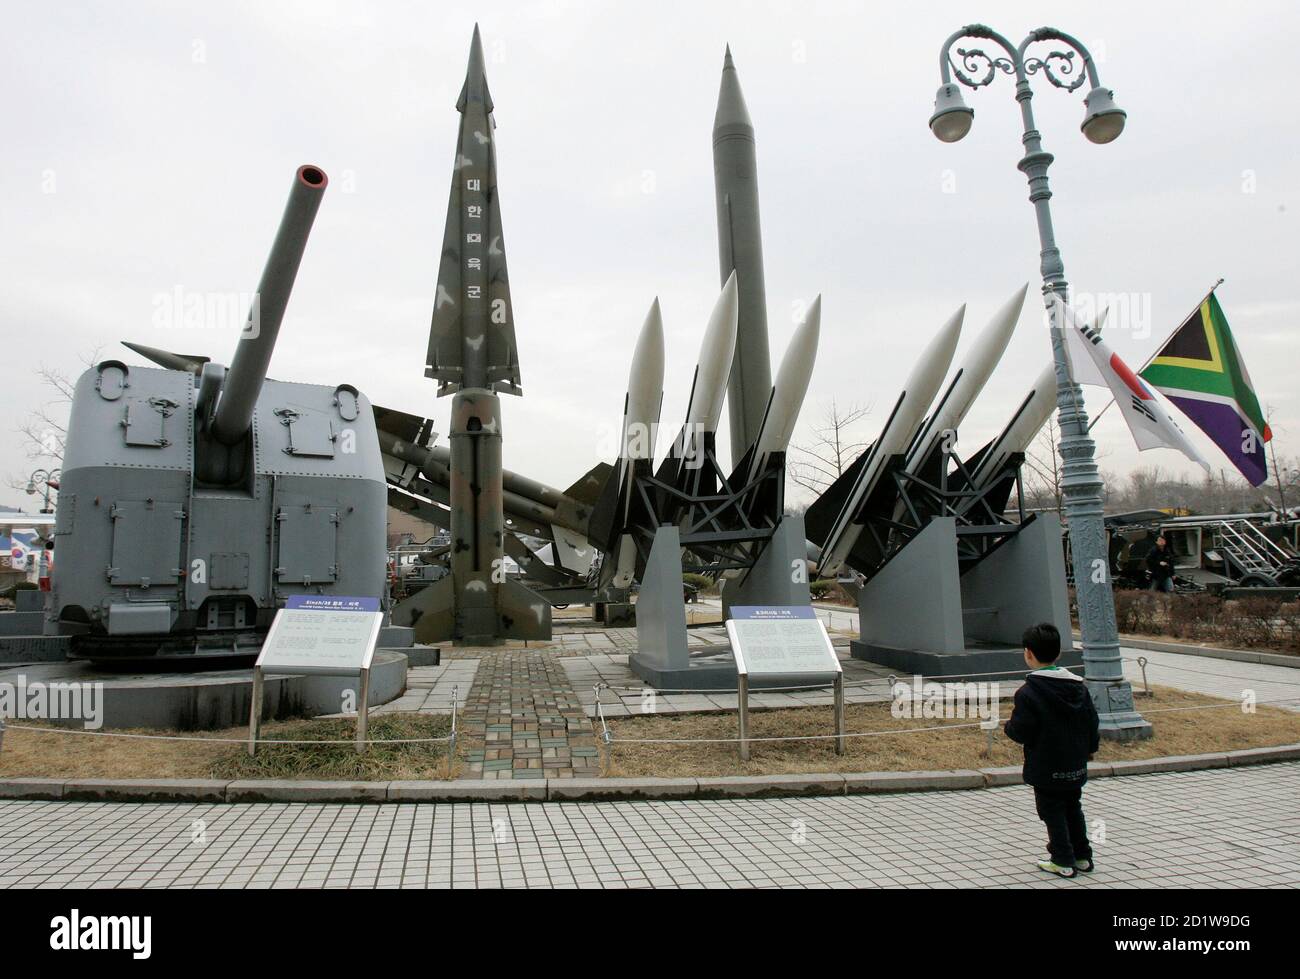 A boy looks at models of a North Korean Scud-B missile (R in the back row),  a Nike missile (L in the back row) and Hawk surface-to-air missiles (R in  the front